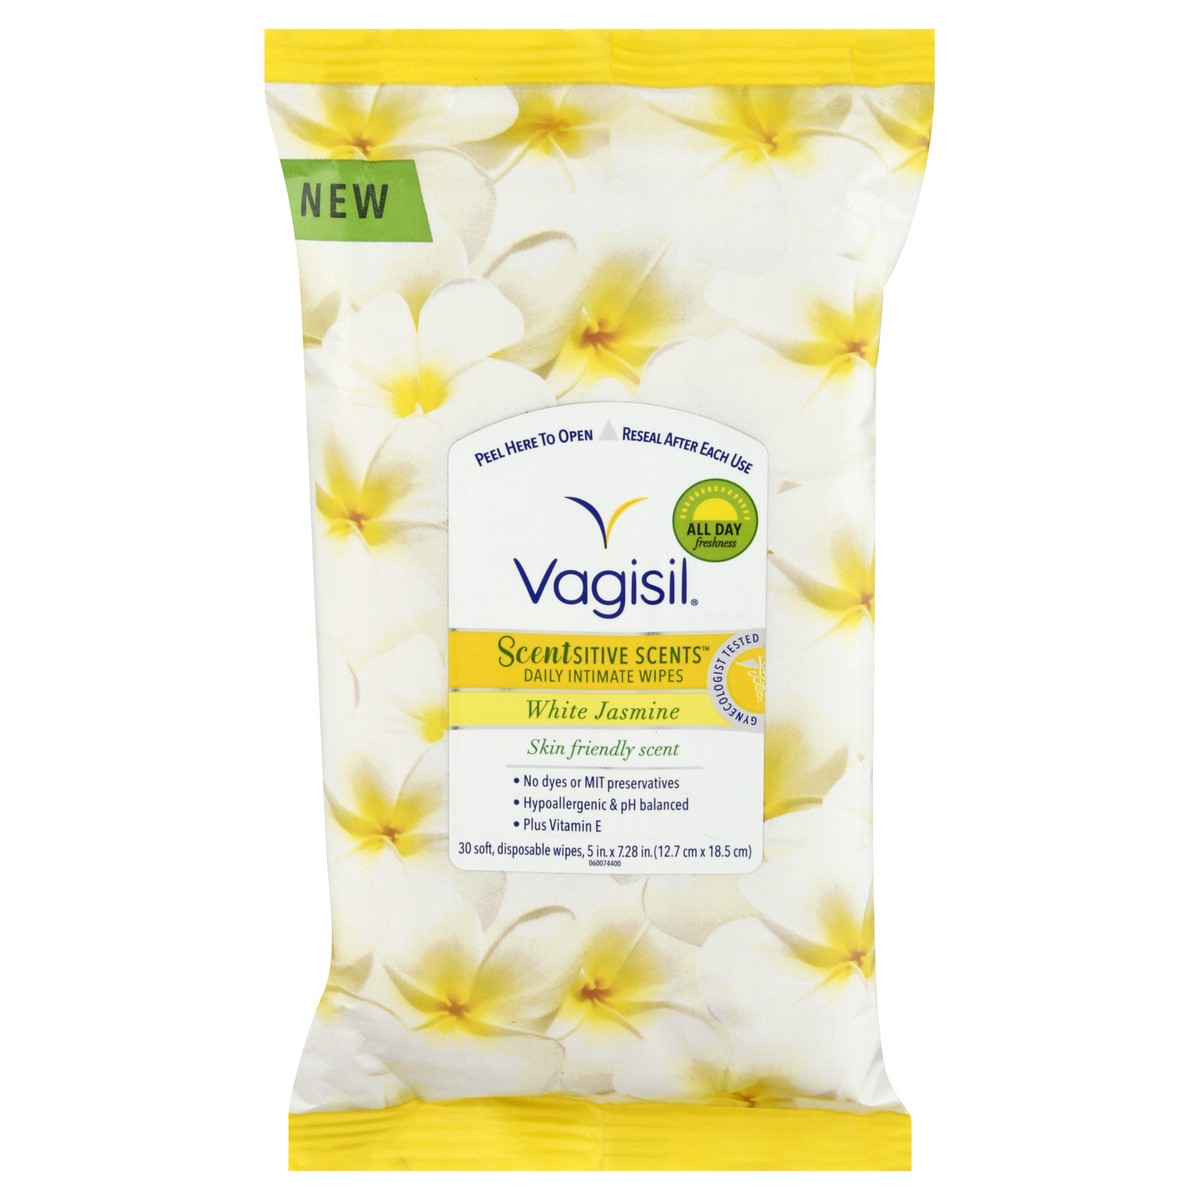 slide 1 of 9, Vagisil Scentsitive Scents Daily Intimate Wipes - White Jasmine, 30 ct